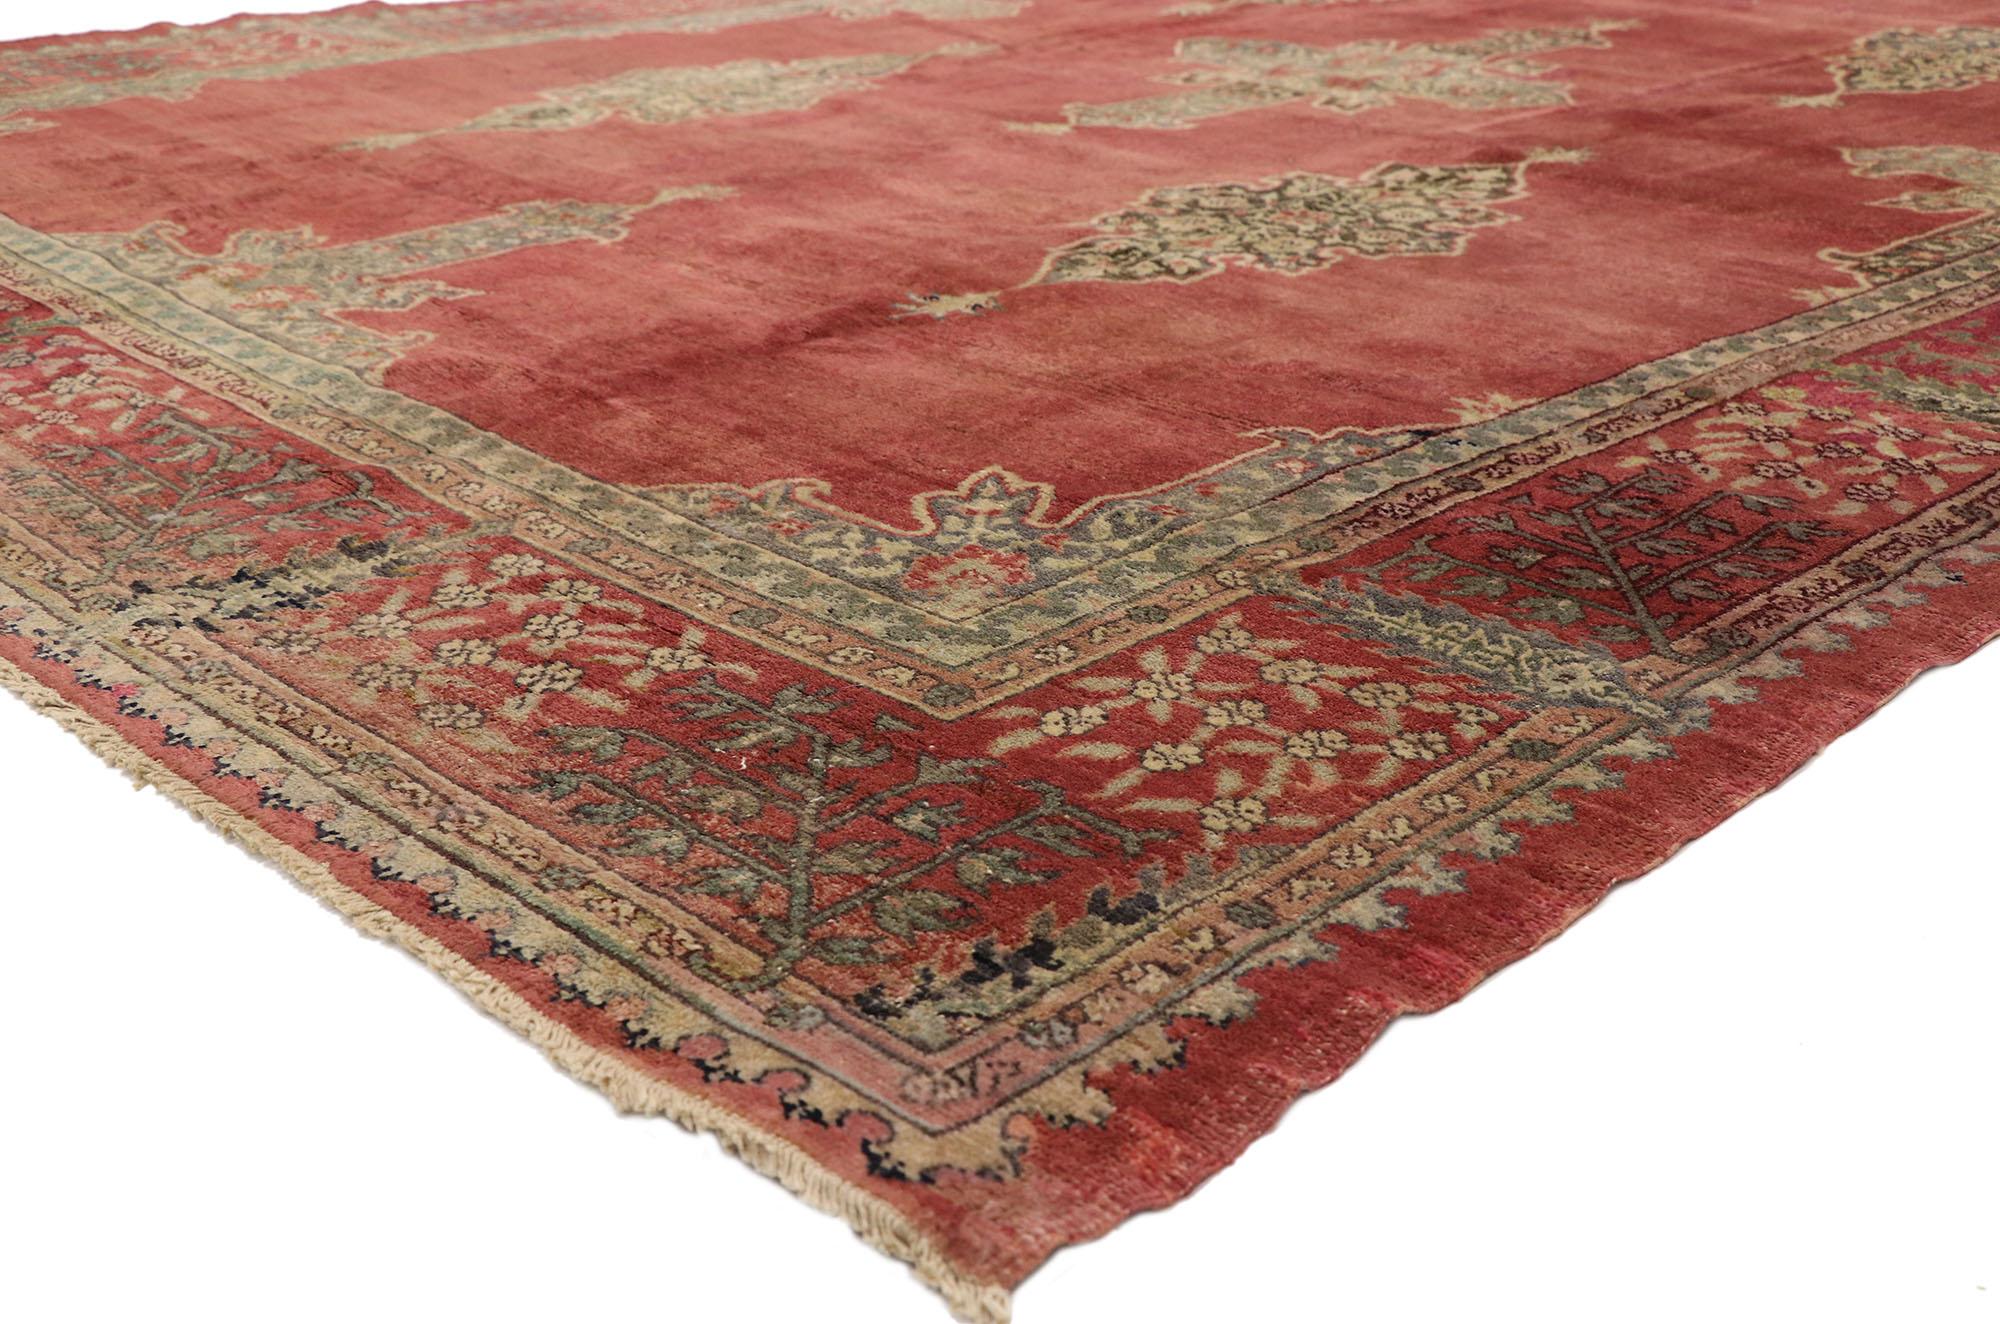 51636 Vintage Turkish Oushak Rug with Rustic Luxe Jacobean Style 08'06 x 12'02. This regal vintage Turkish Oushak rug appears like a sumptuous Italian velvet, recalling the rich and luxurious design furnishings of a bygone era such as the reign of